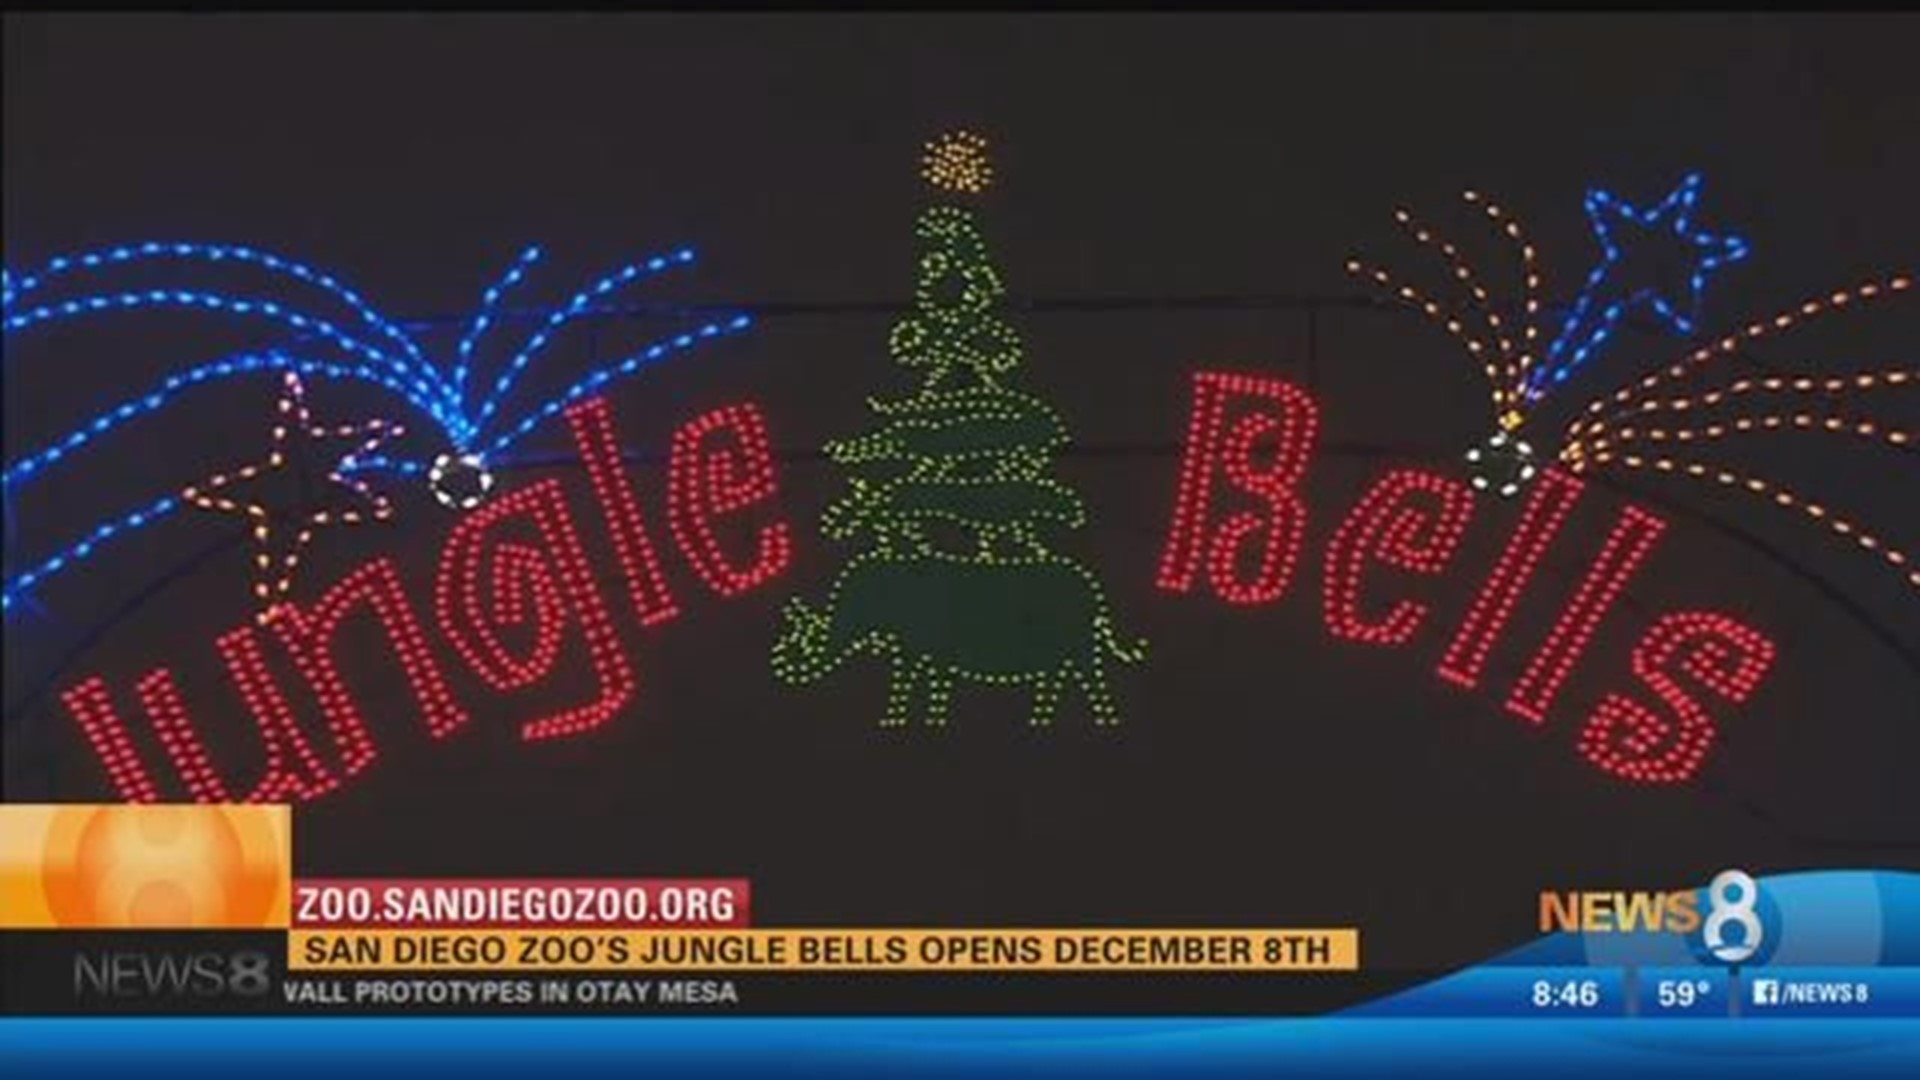 Jungle Bells at the San Diego Zoo